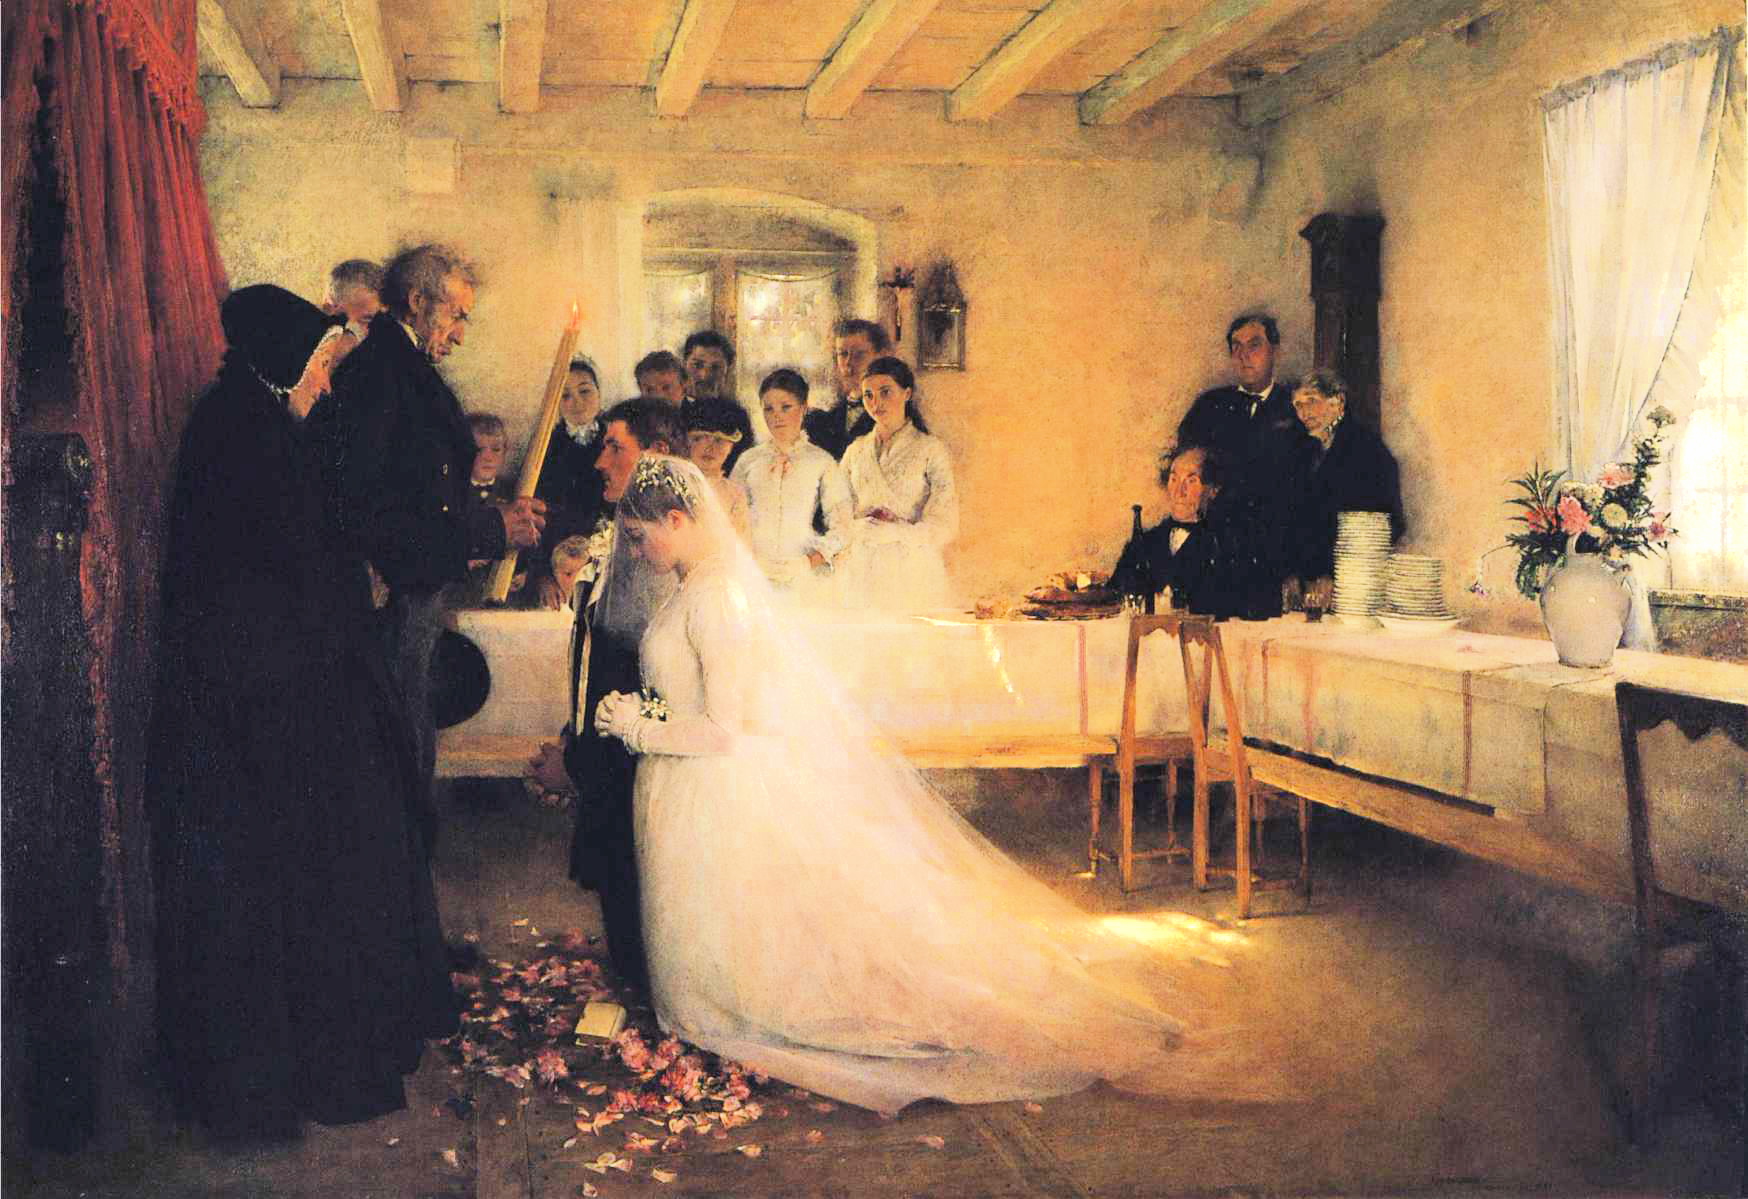 Marriage in our time